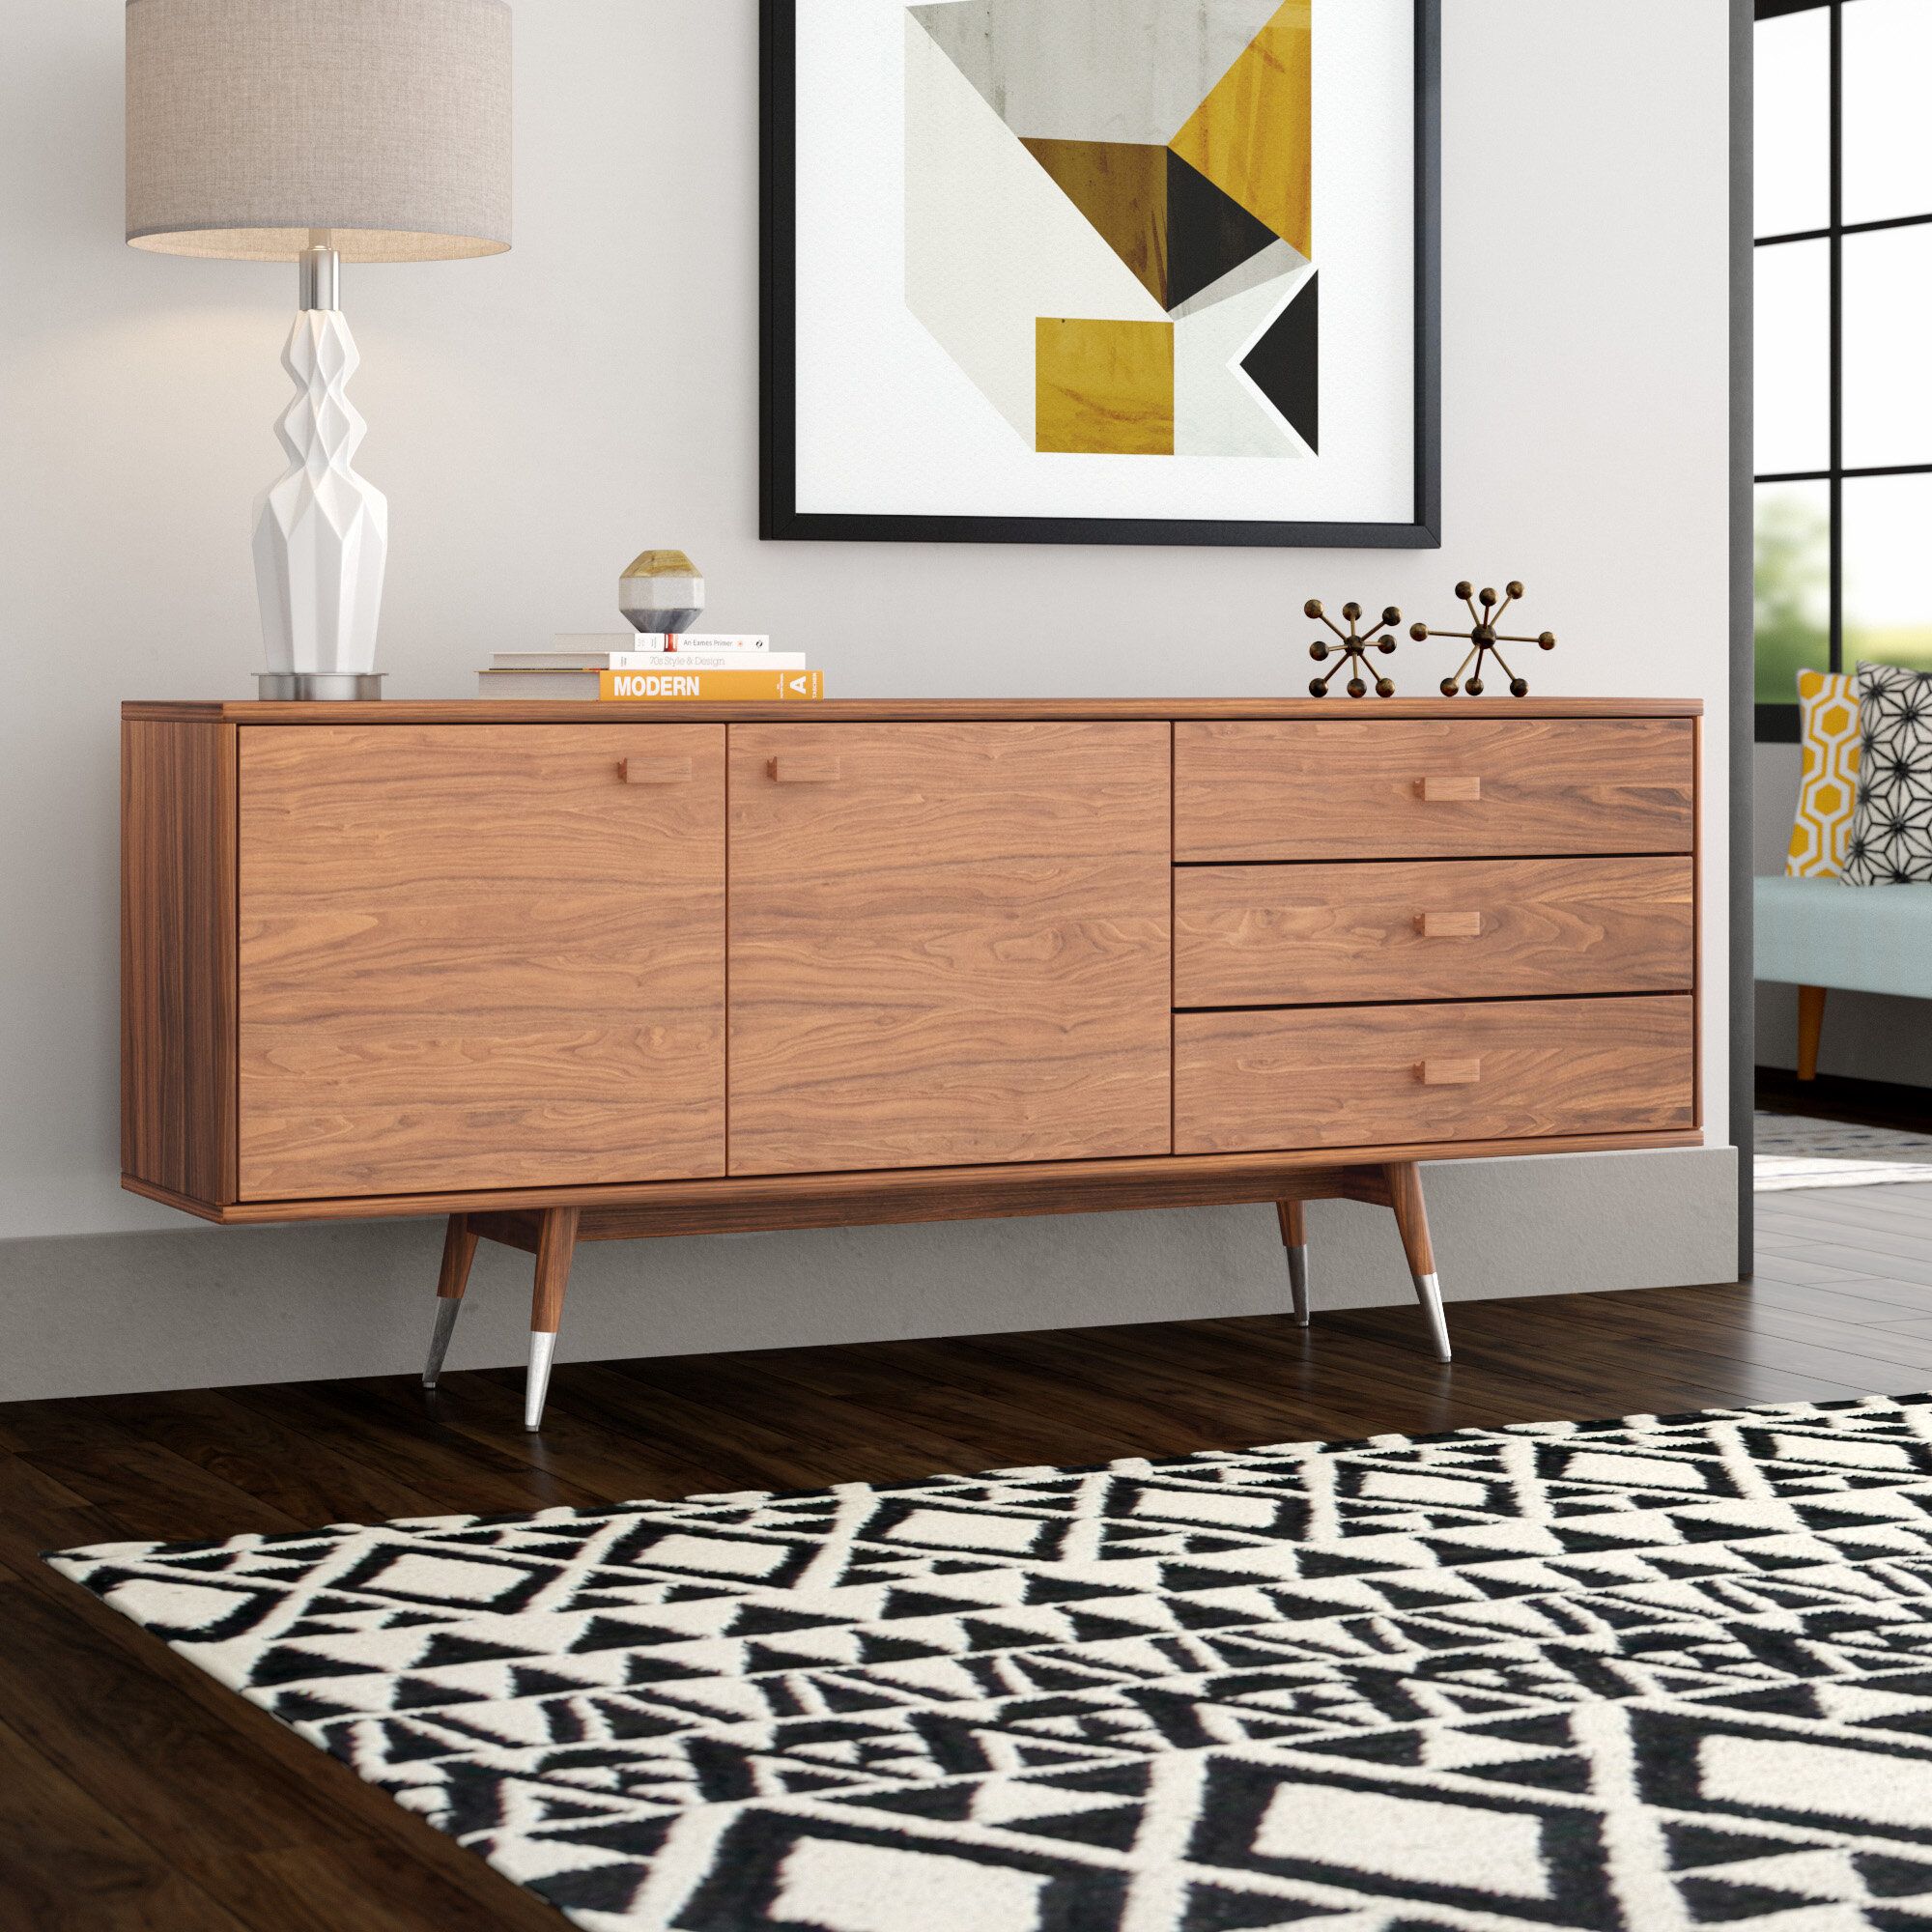 Mid Century Modern Sideboard / Credenza Sideboards & Buffets Pertaining To Longley Sideboards (View 8 of 30)